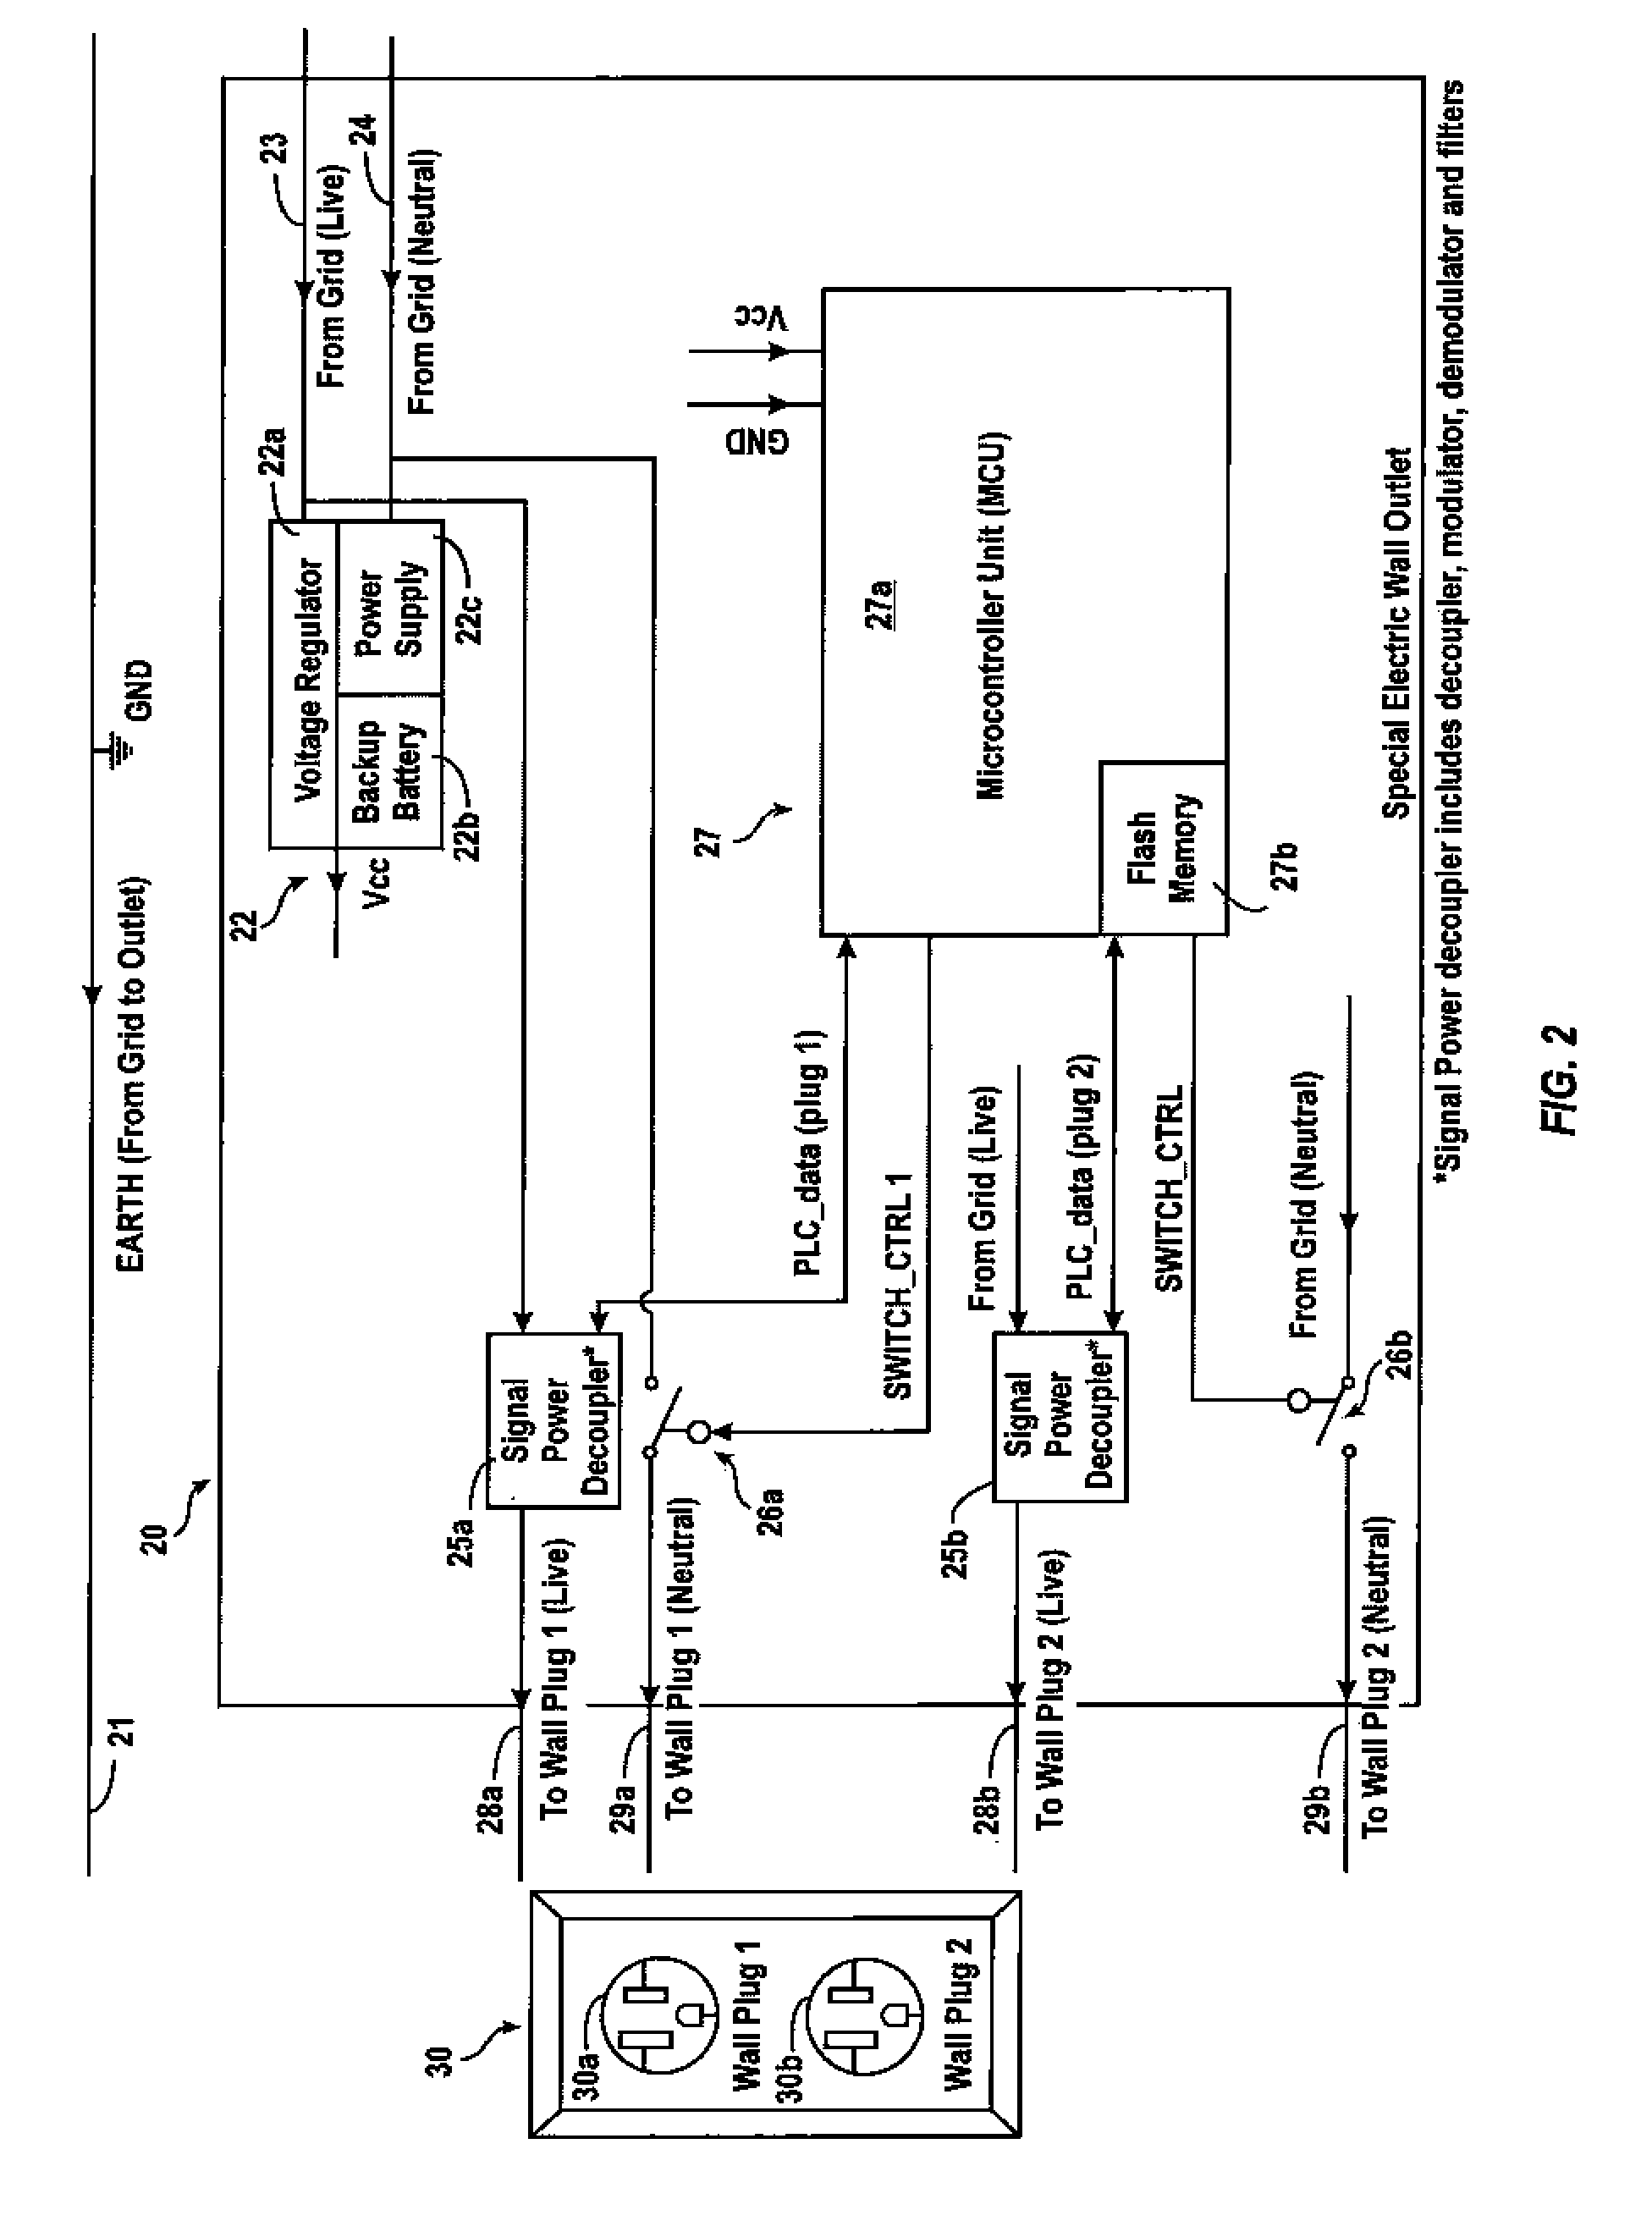 Modularized interface and related method for connecting plug-in electric vehicles to the energy grid